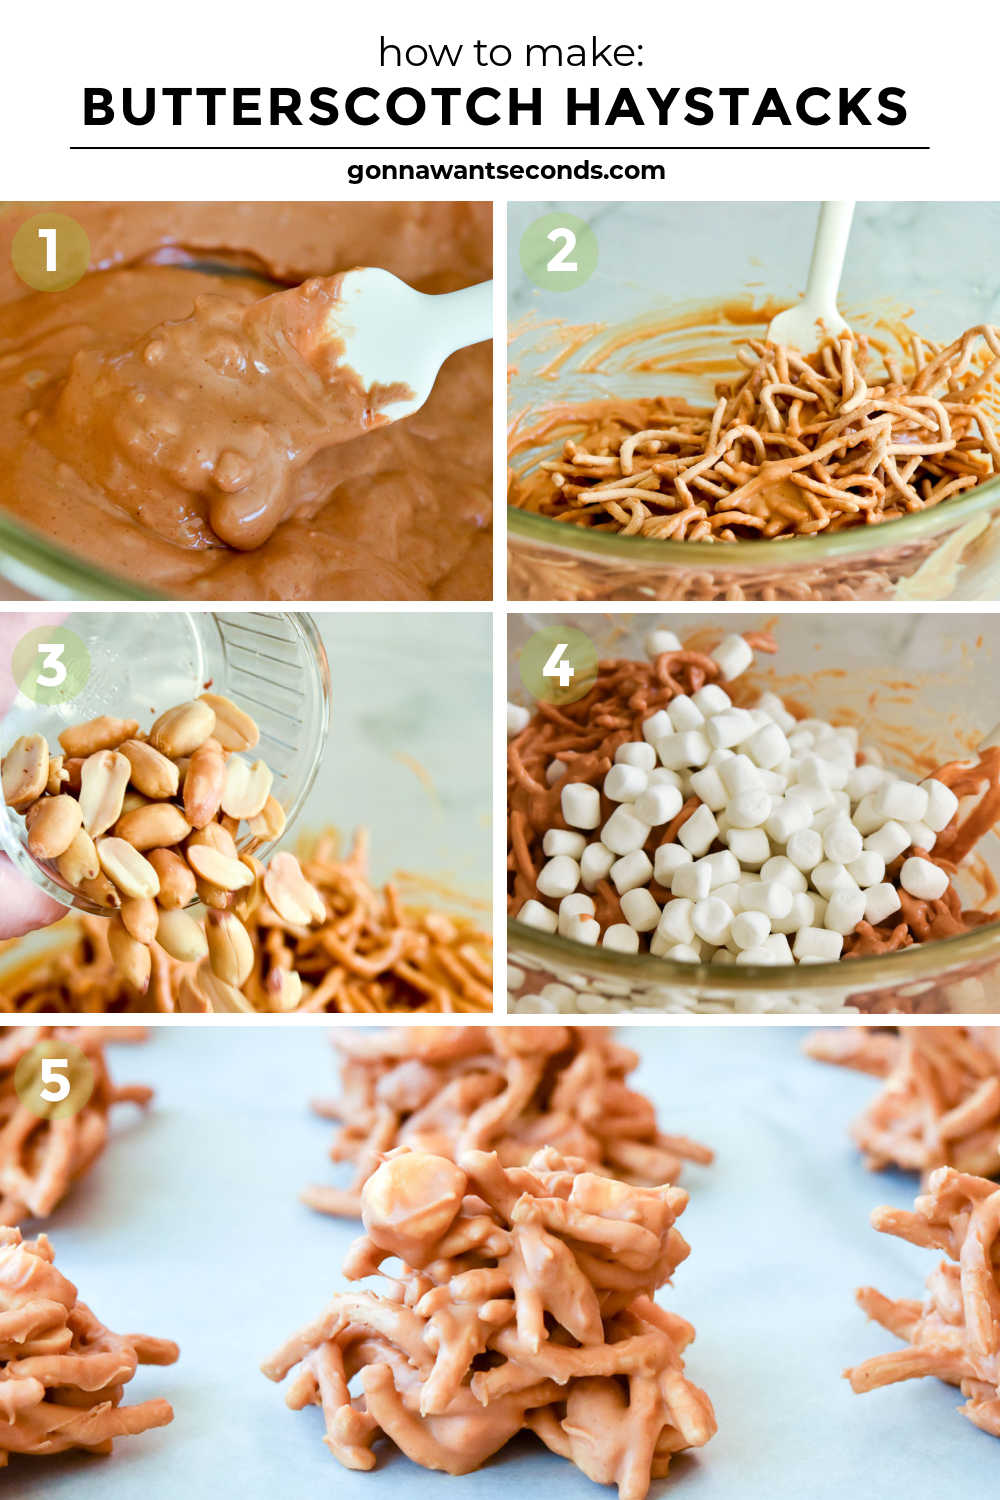 Step by step how to make butterscotch haystacks